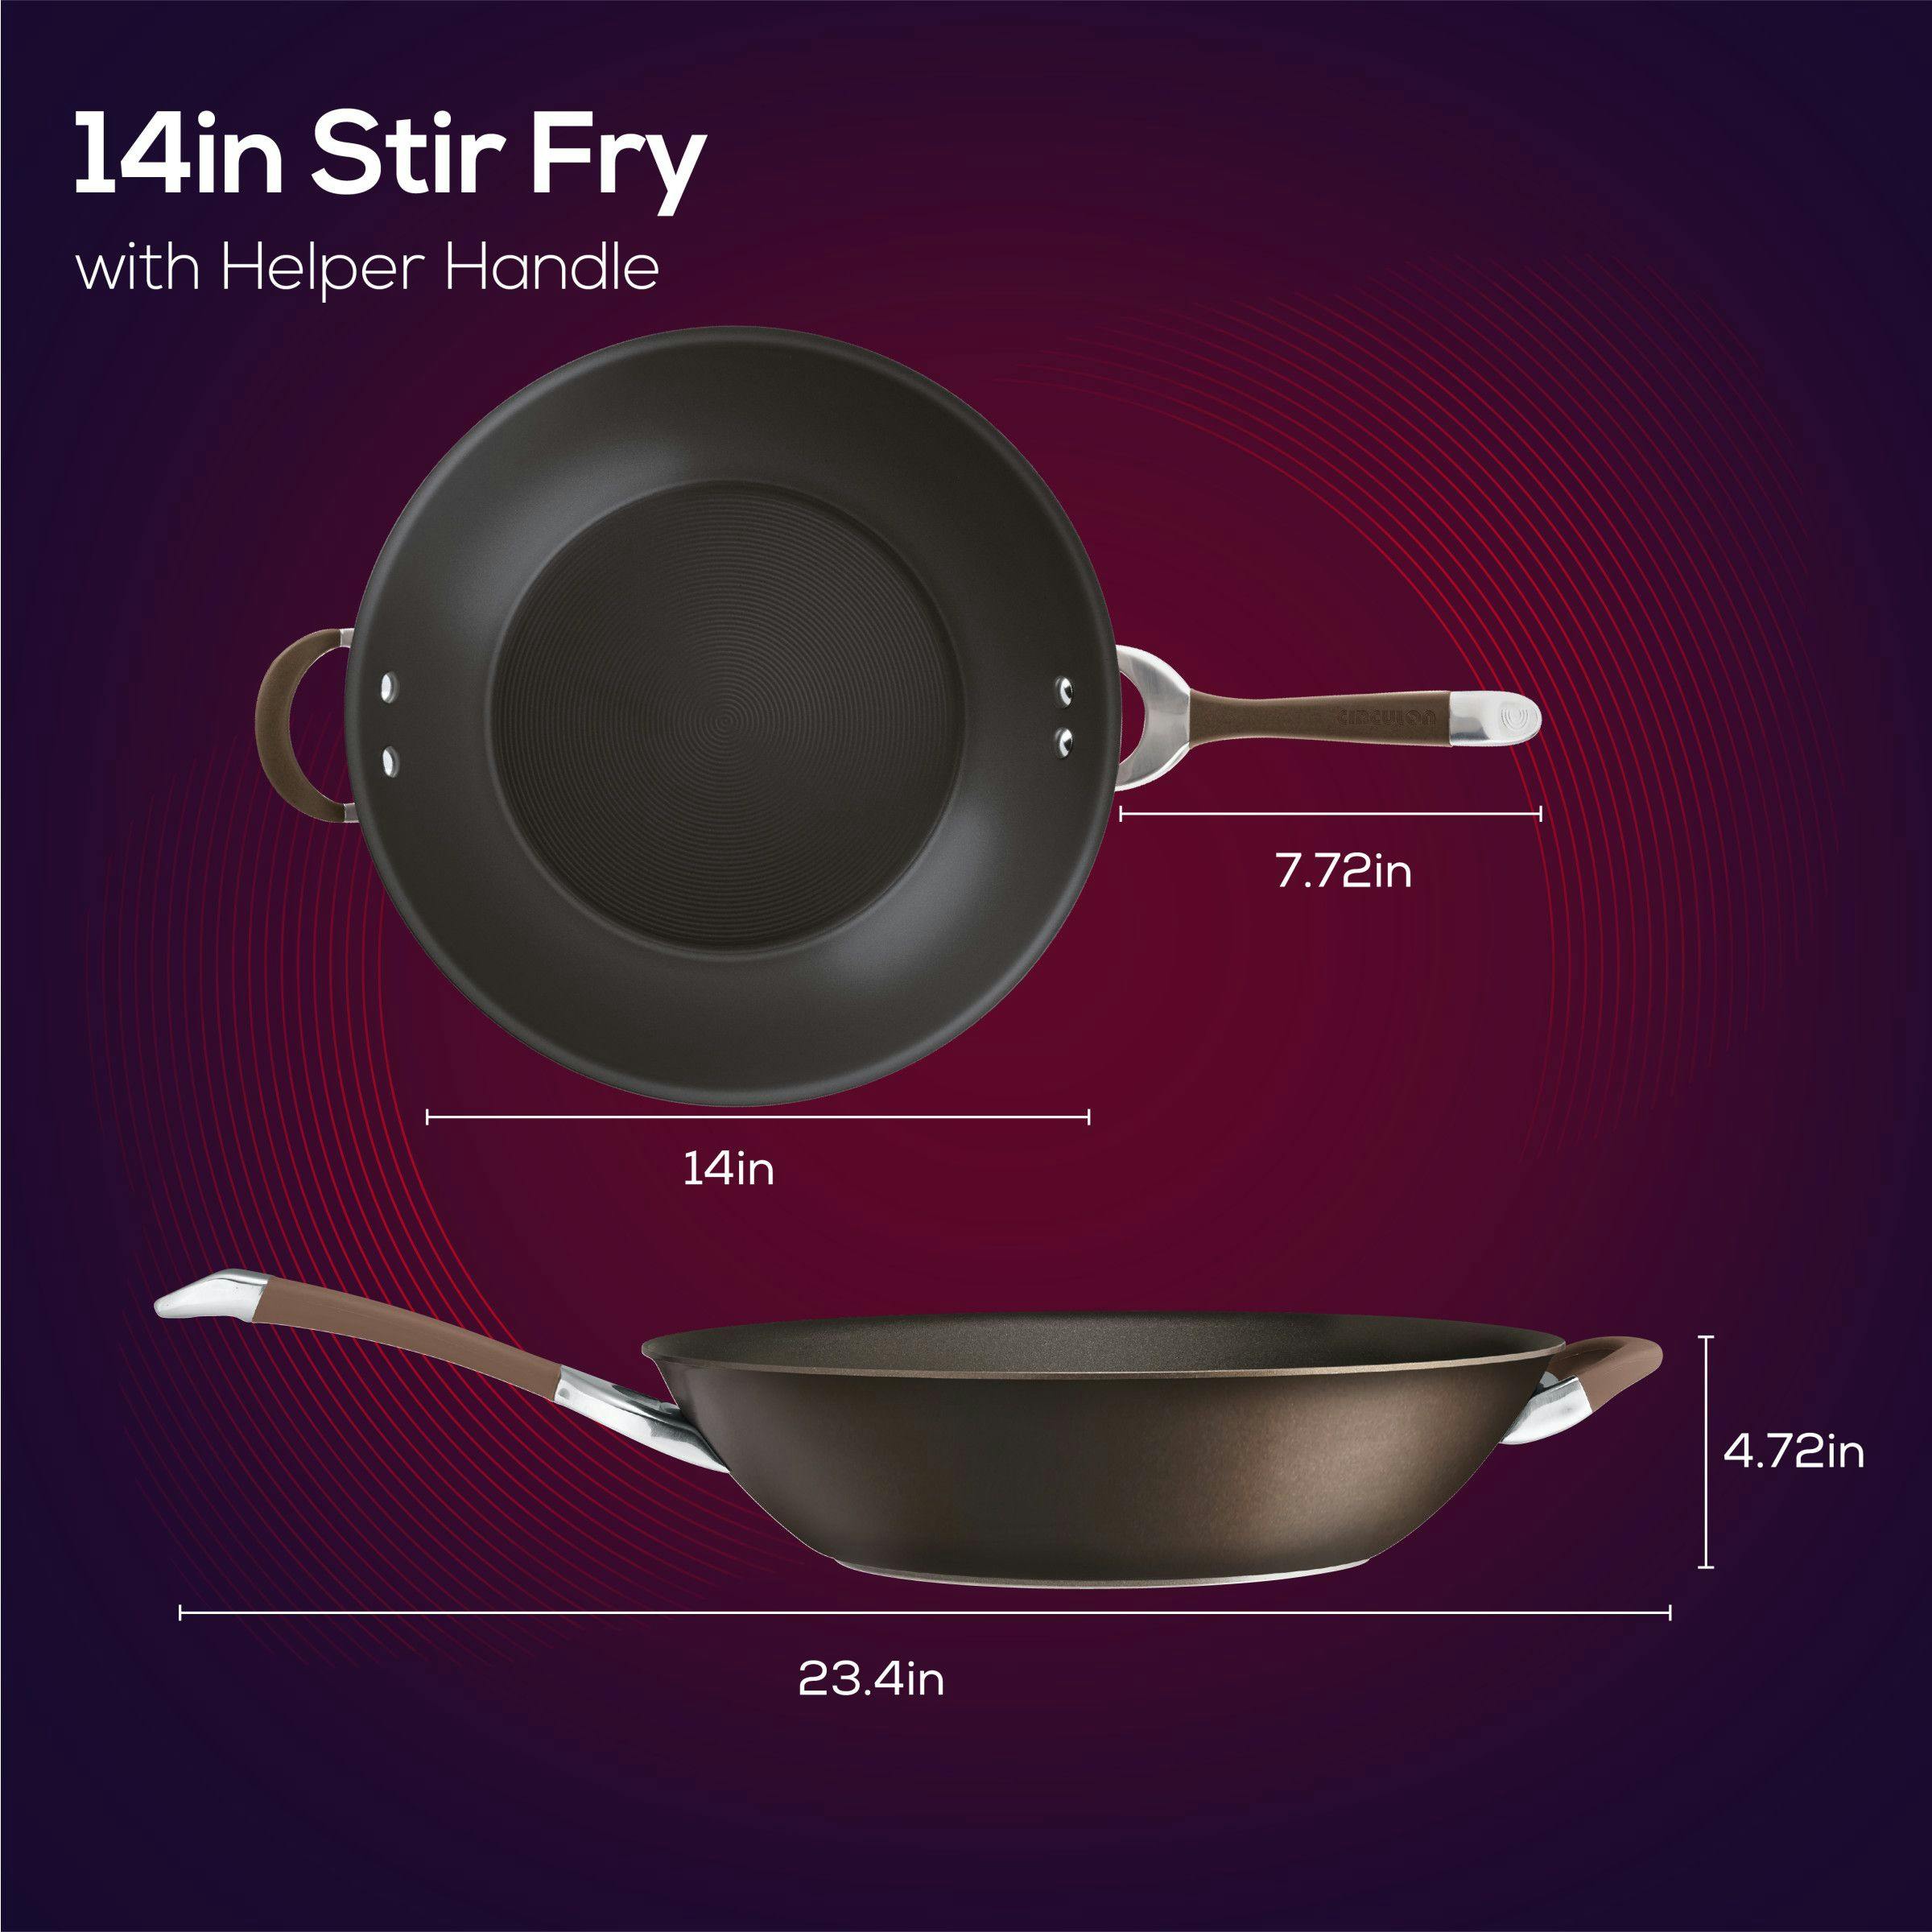 Circulon Symmetry Hard-Anodized Nonstick Induction Stir Fry Pan with Helper Handle, 14-Inch, Chocolate